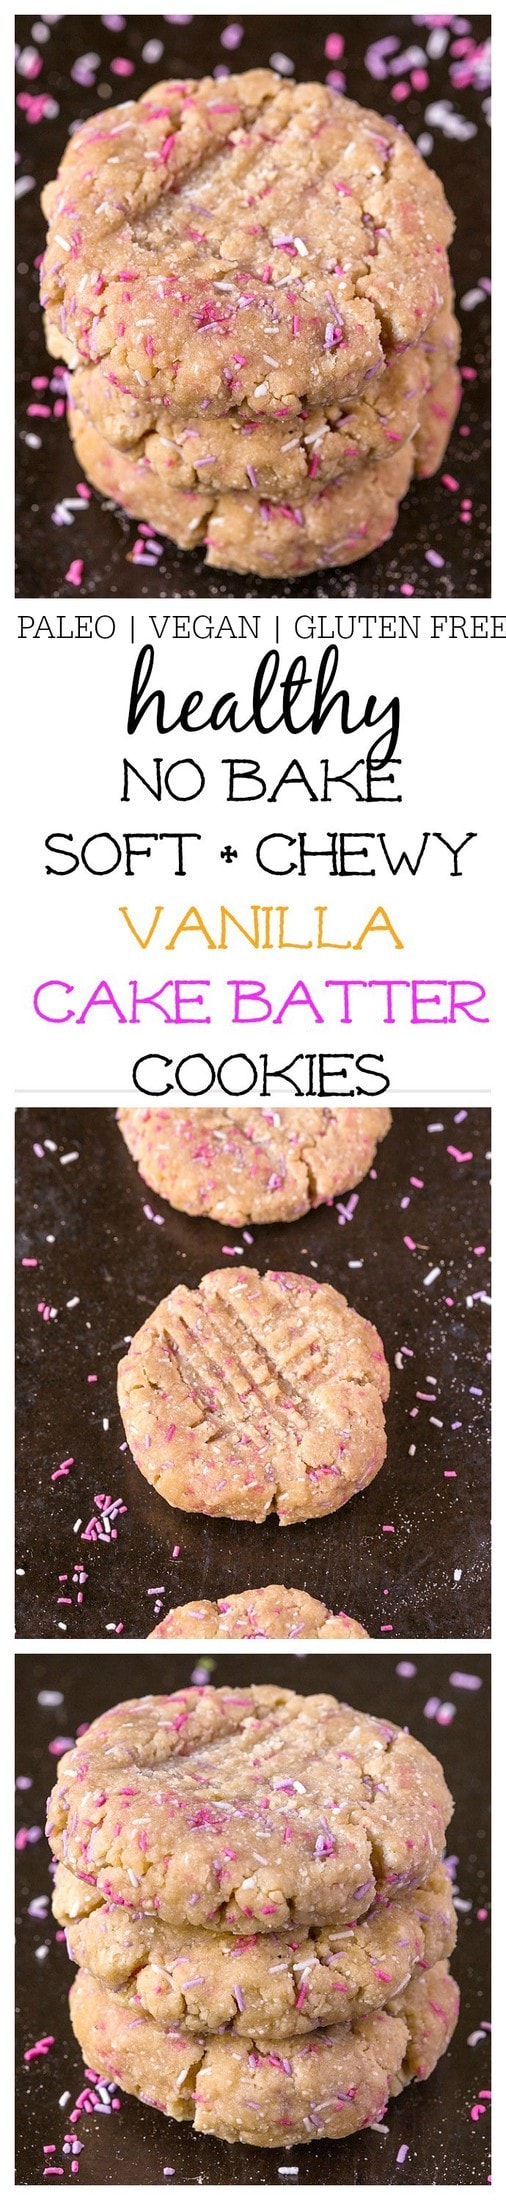 Healthy No Bake Vanilla Cake Batter Cookies- One bowl and ten minutes is all you'll need to have dessert for breakfast- With a healthy makeover! These No Bake Protein Packed Vanilla Cake Batter cookies are soft and chewy! Gluten, sugar and dairy free with a vegan and paleo option too! 